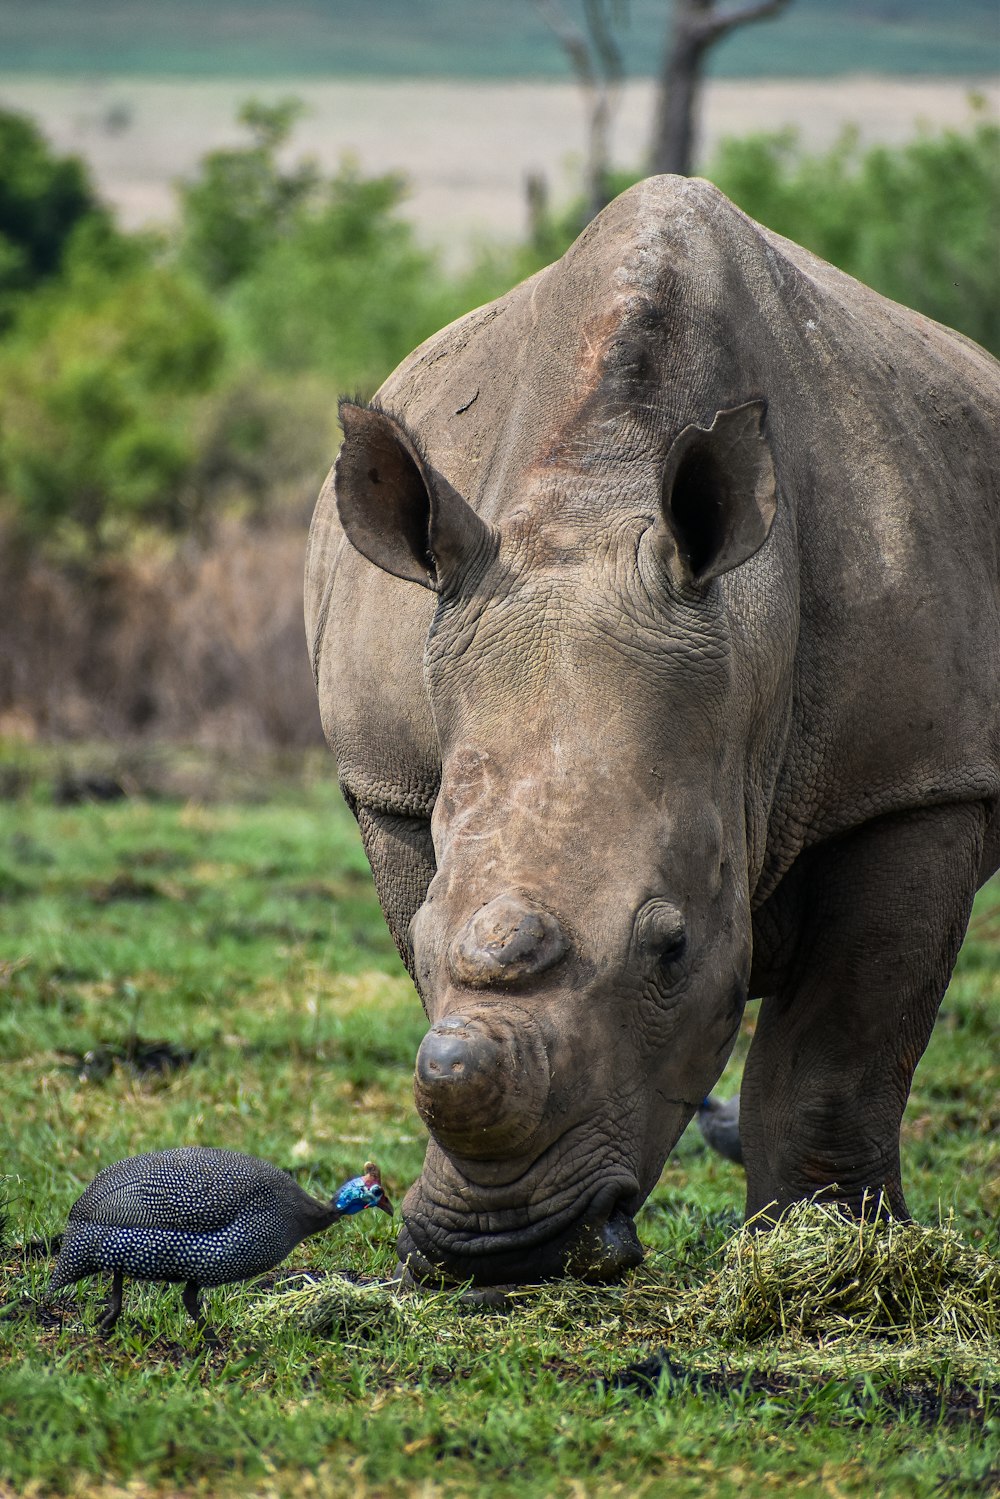 a large rhinoceros standing next to a small bird